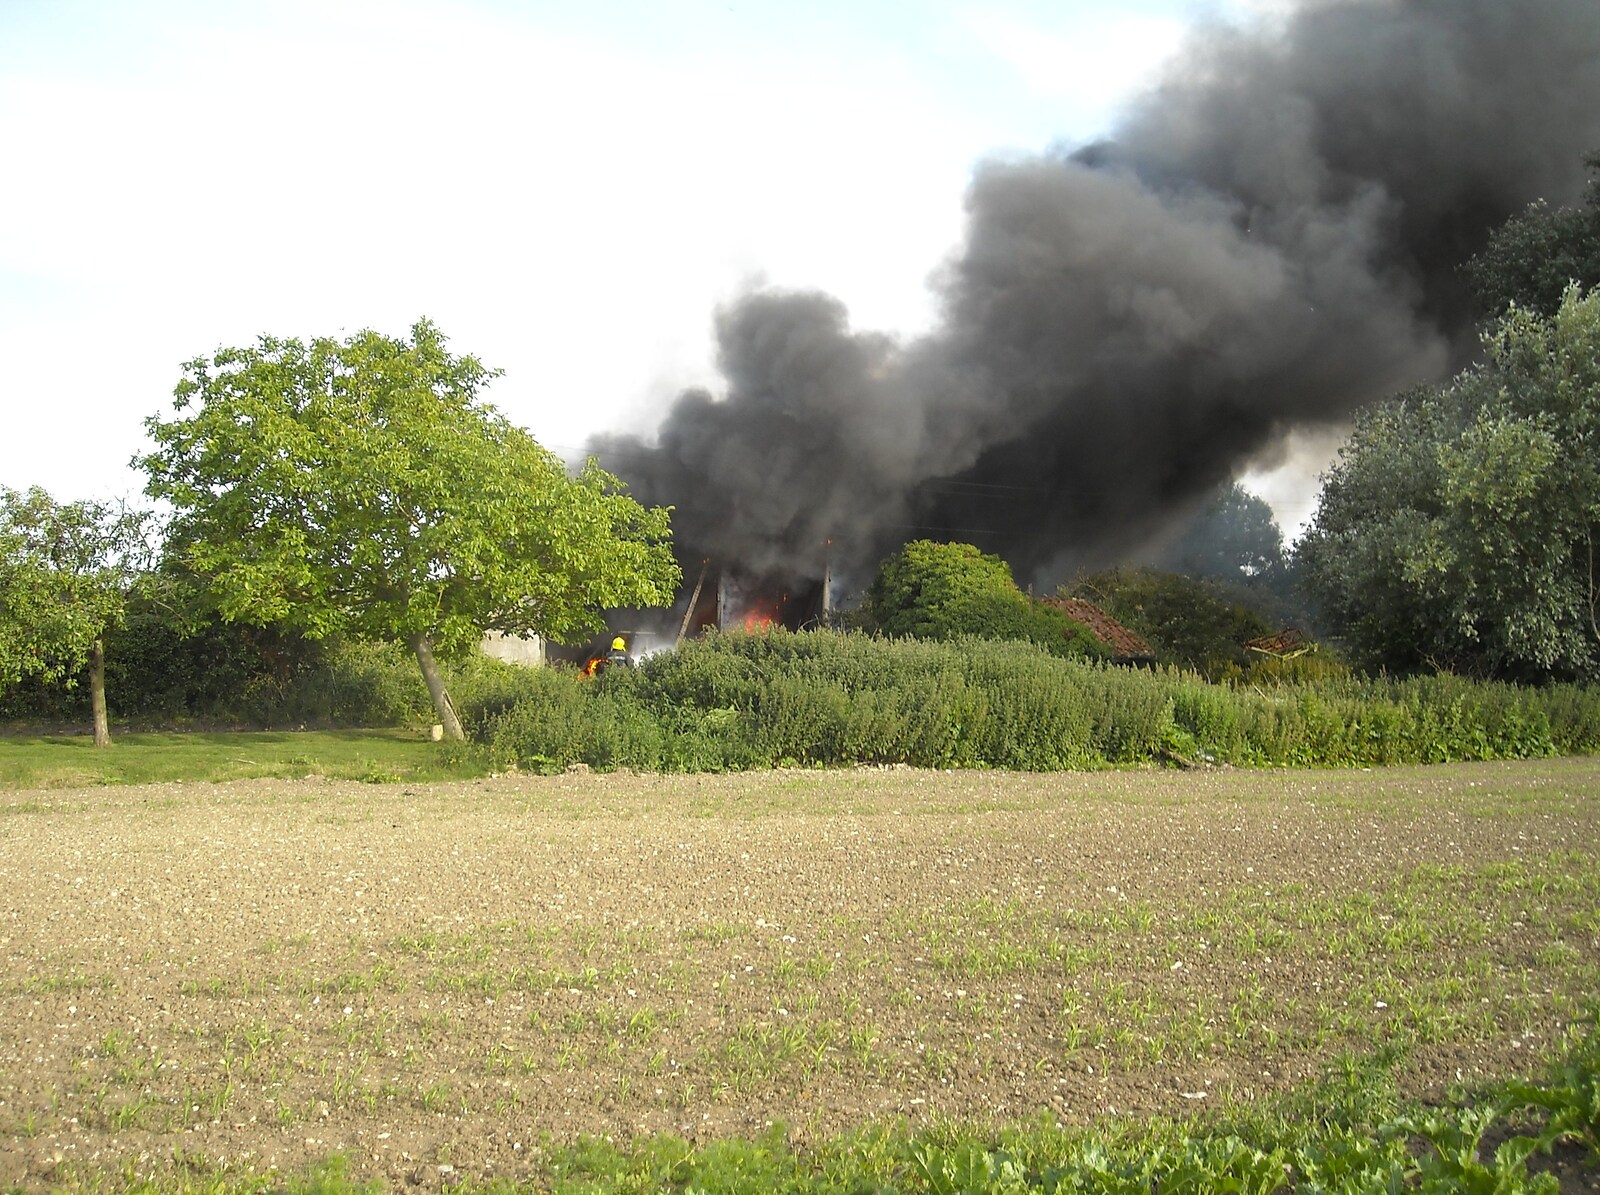 Smoke billows over the fields from A Fire at Valley Farm, Thrandeston, Suffolk - 24th June 2009